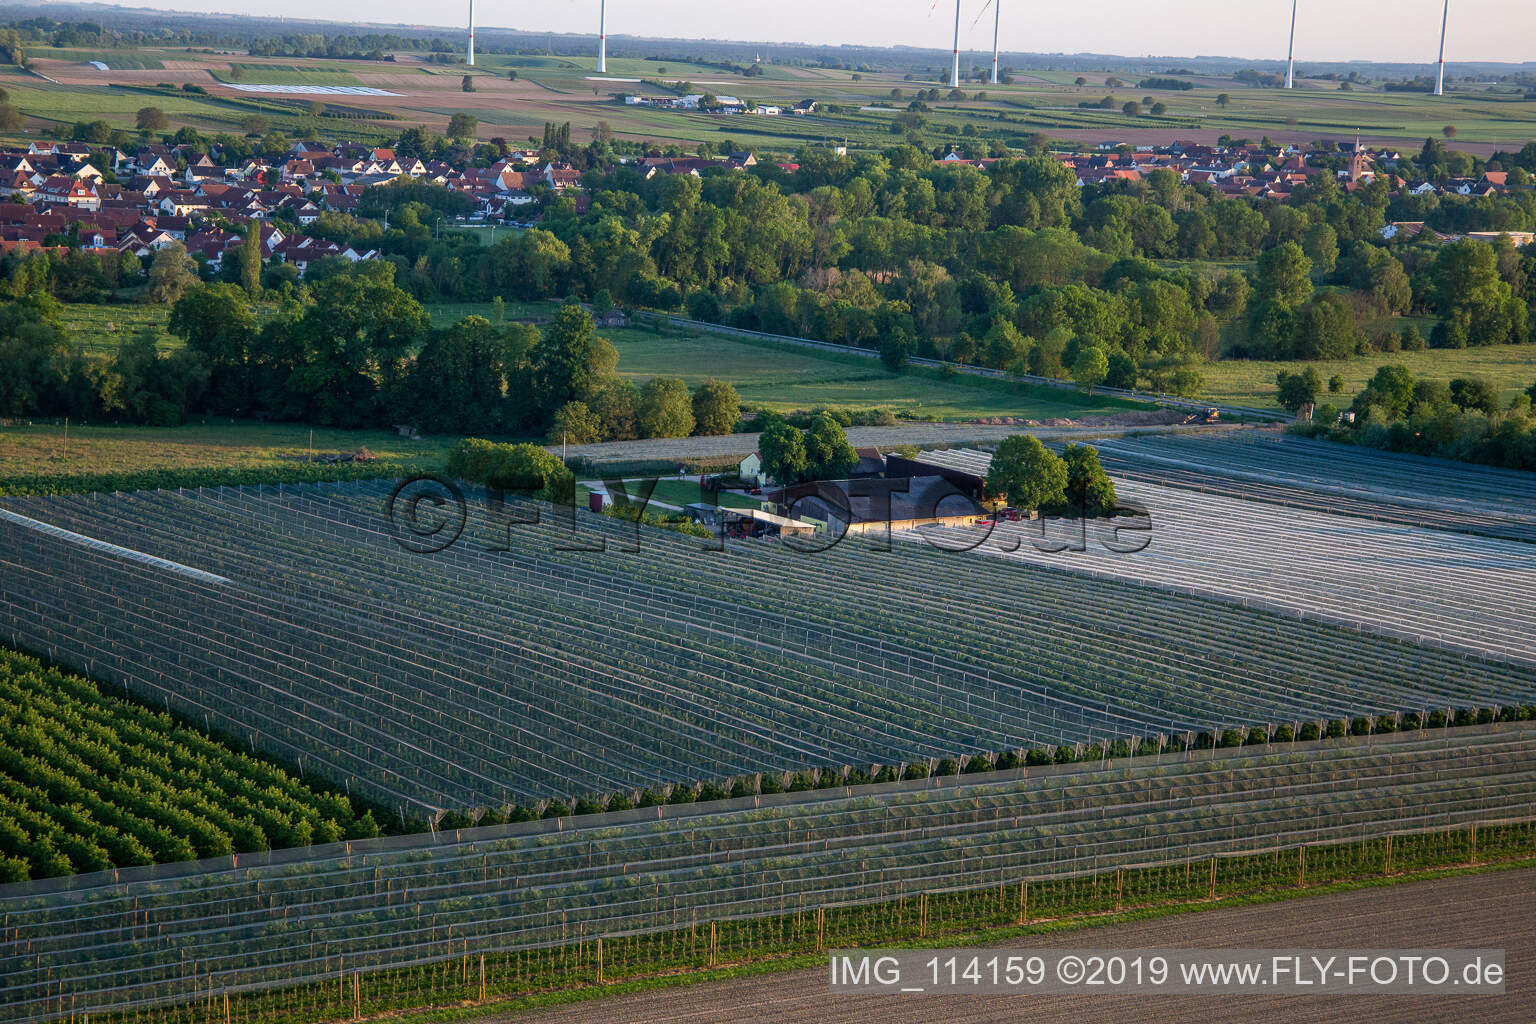 Gensheimer fruit and spagel farm in Steinweiler in the state Rhineland-Palatinate, Germany seen from above